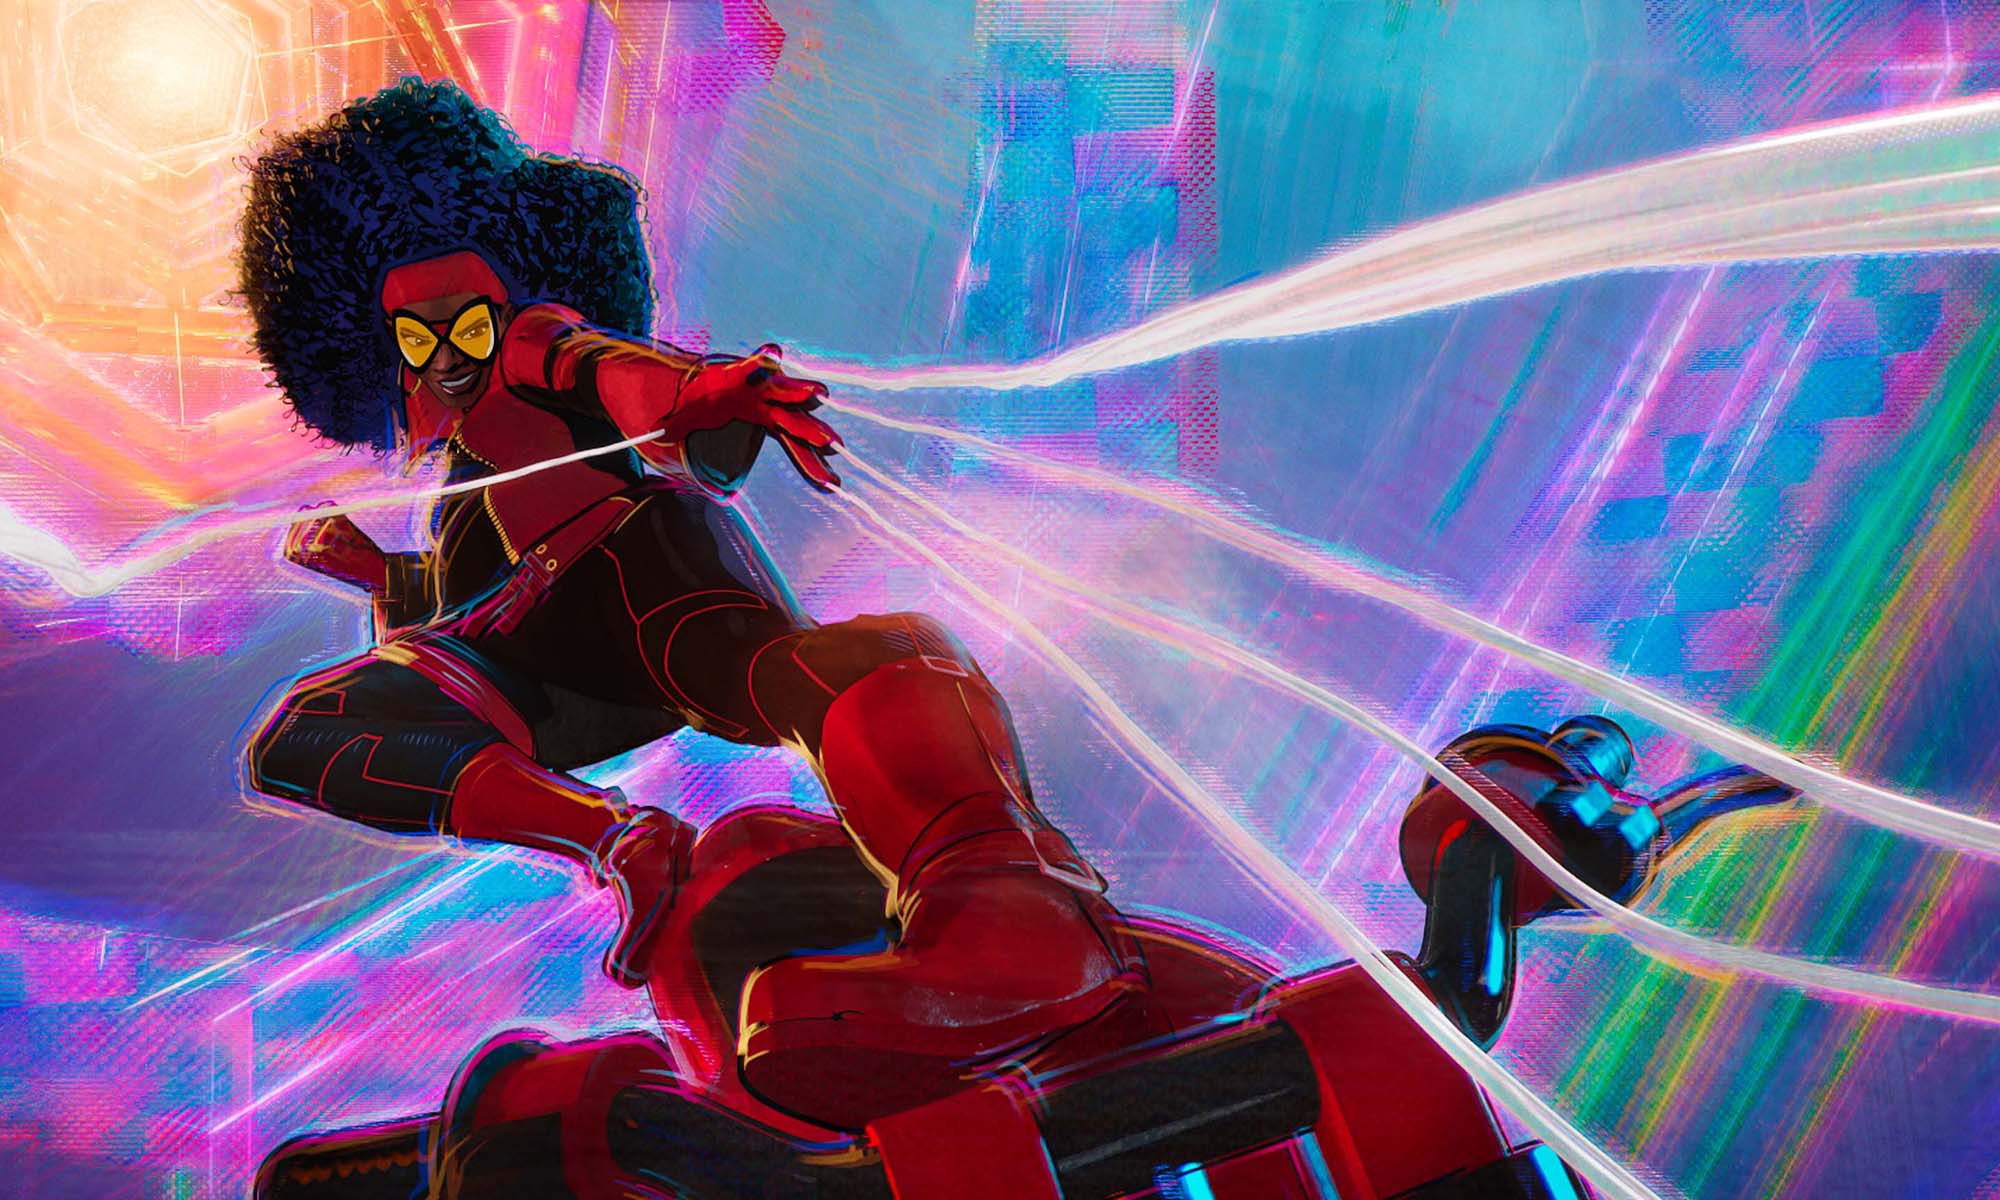 First SpiderMan Across the SpiderVerse trailer shows first look at